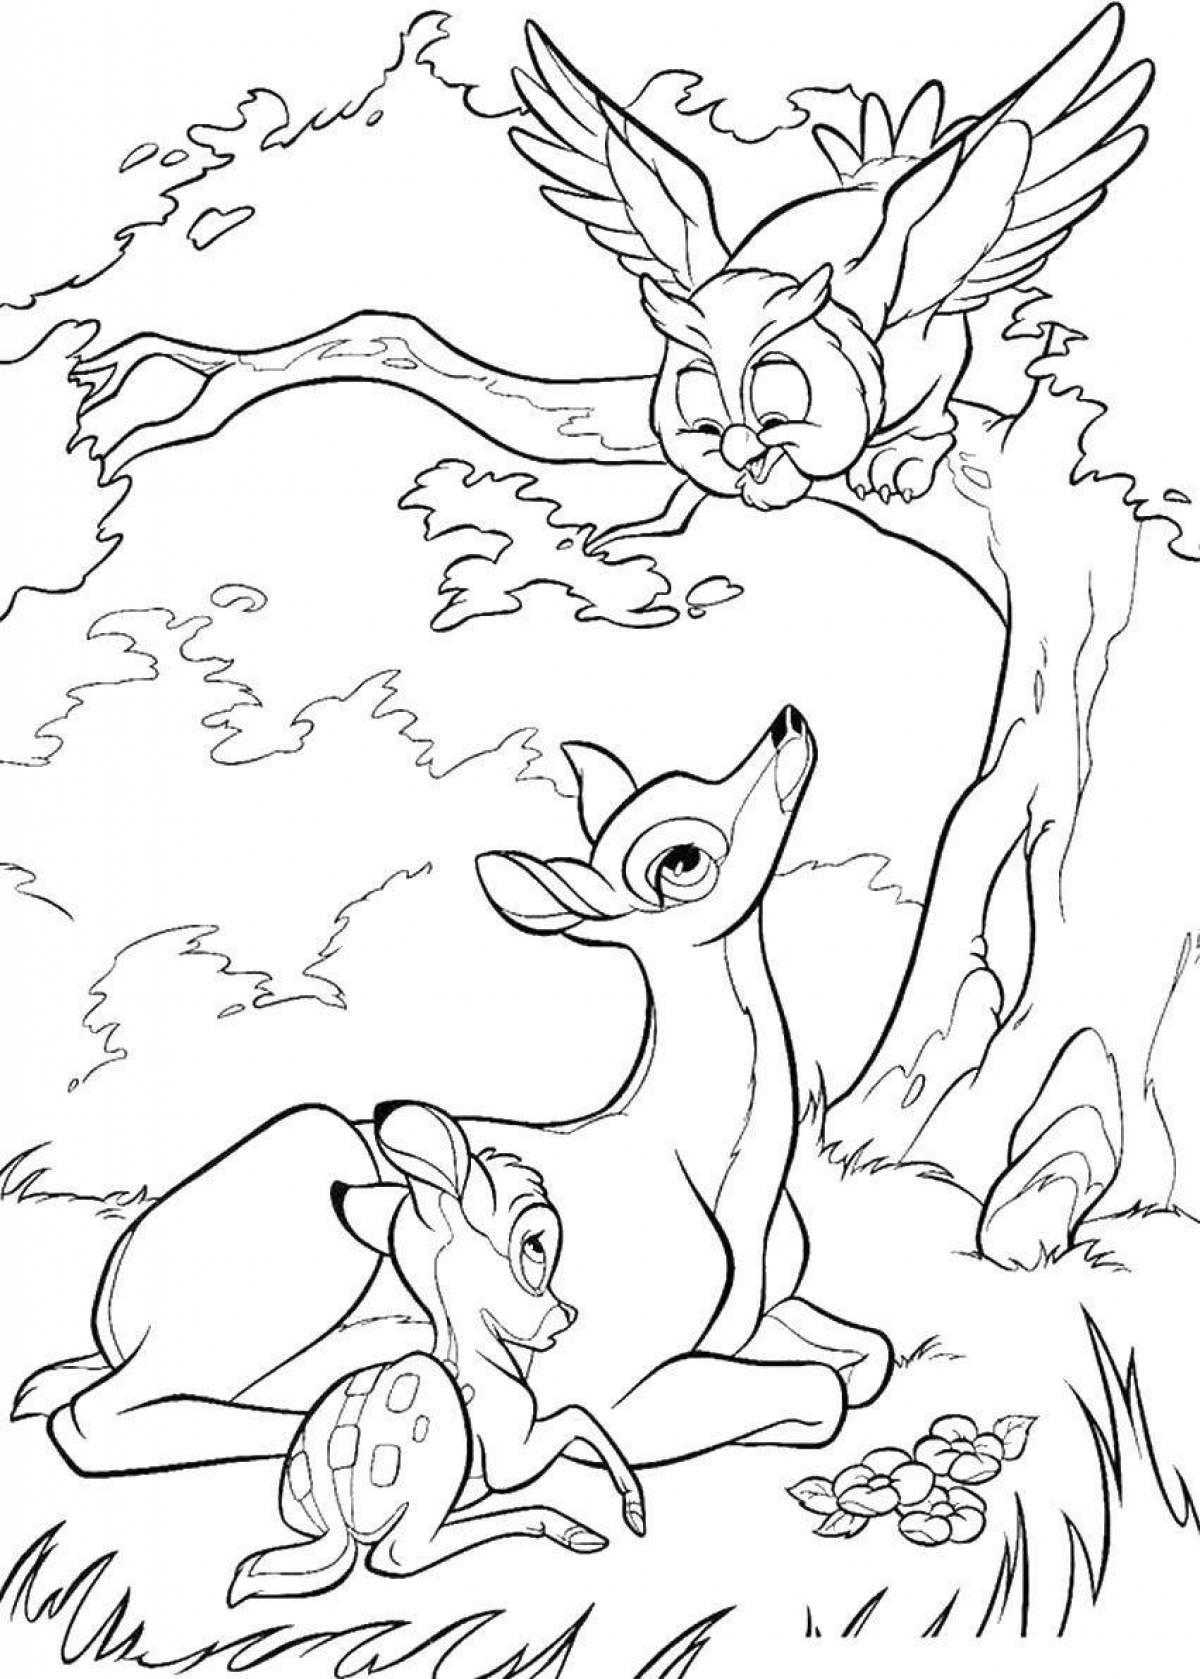 Colorful bambi coloring for kids